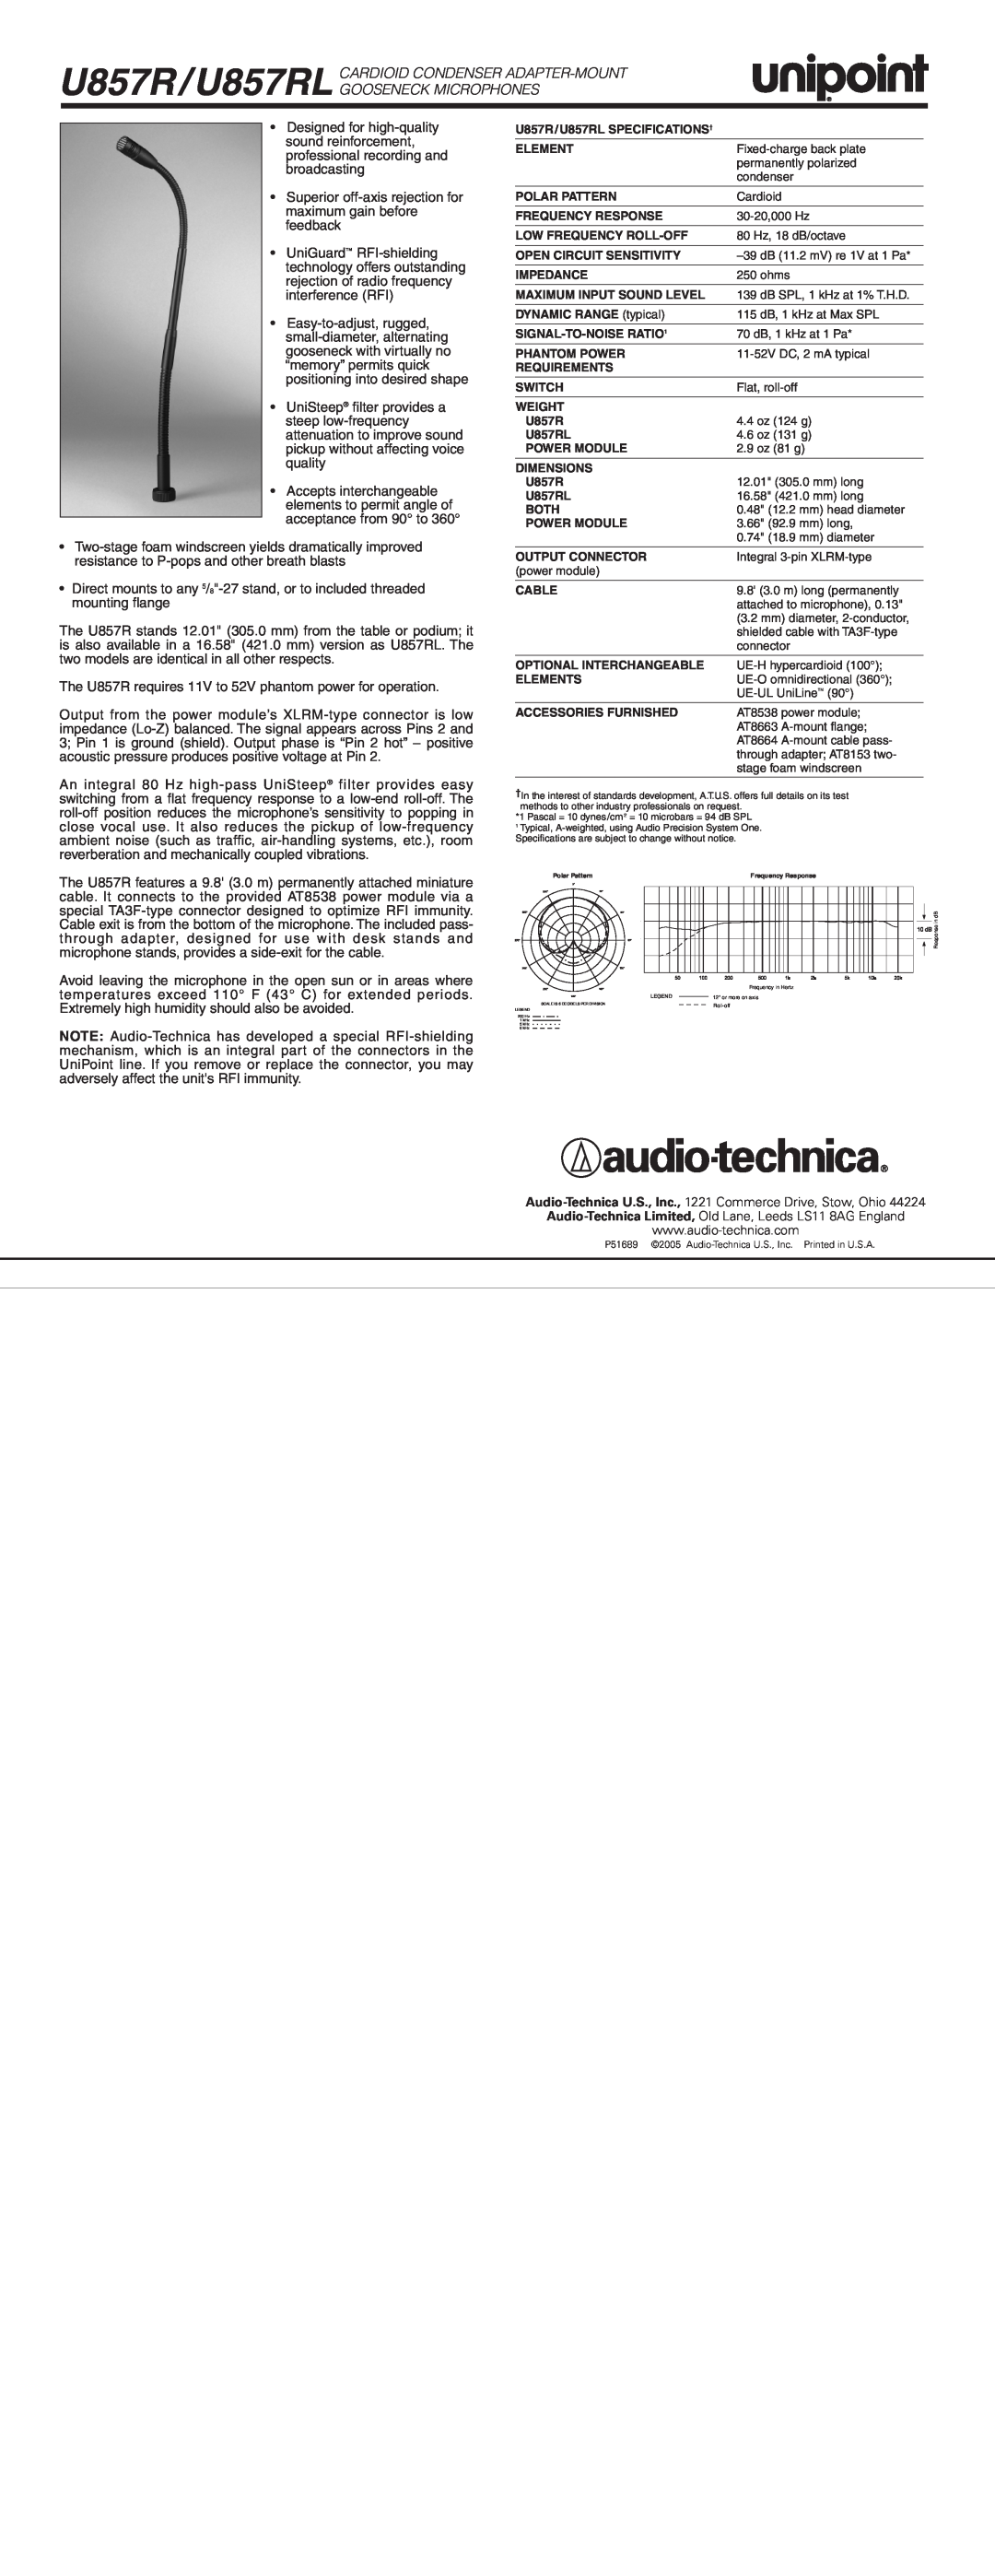 Audio-Technica U857R manual Features, Description, Installation and Operation, Architect’s and Engineer’s Specifications 